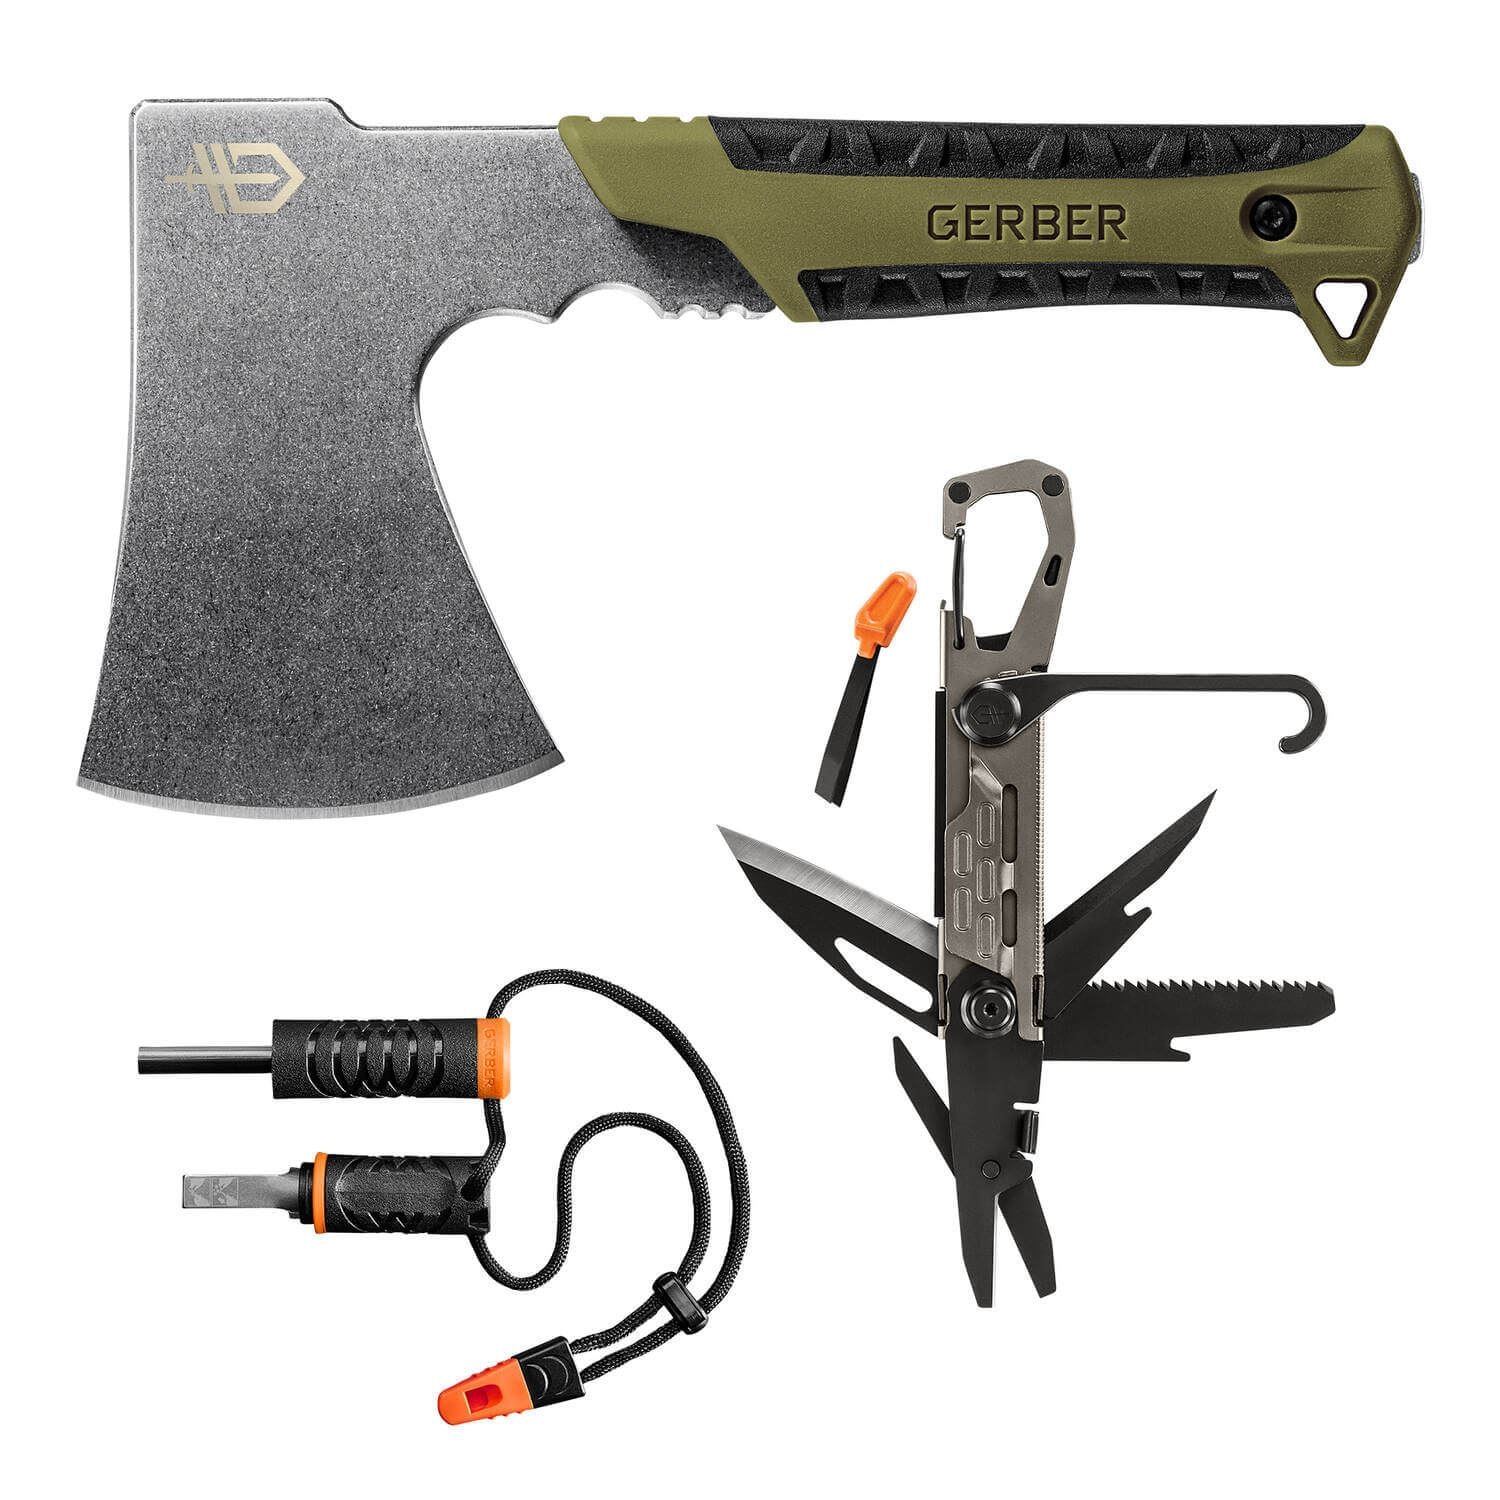 Adventure Tool Kits for Survival